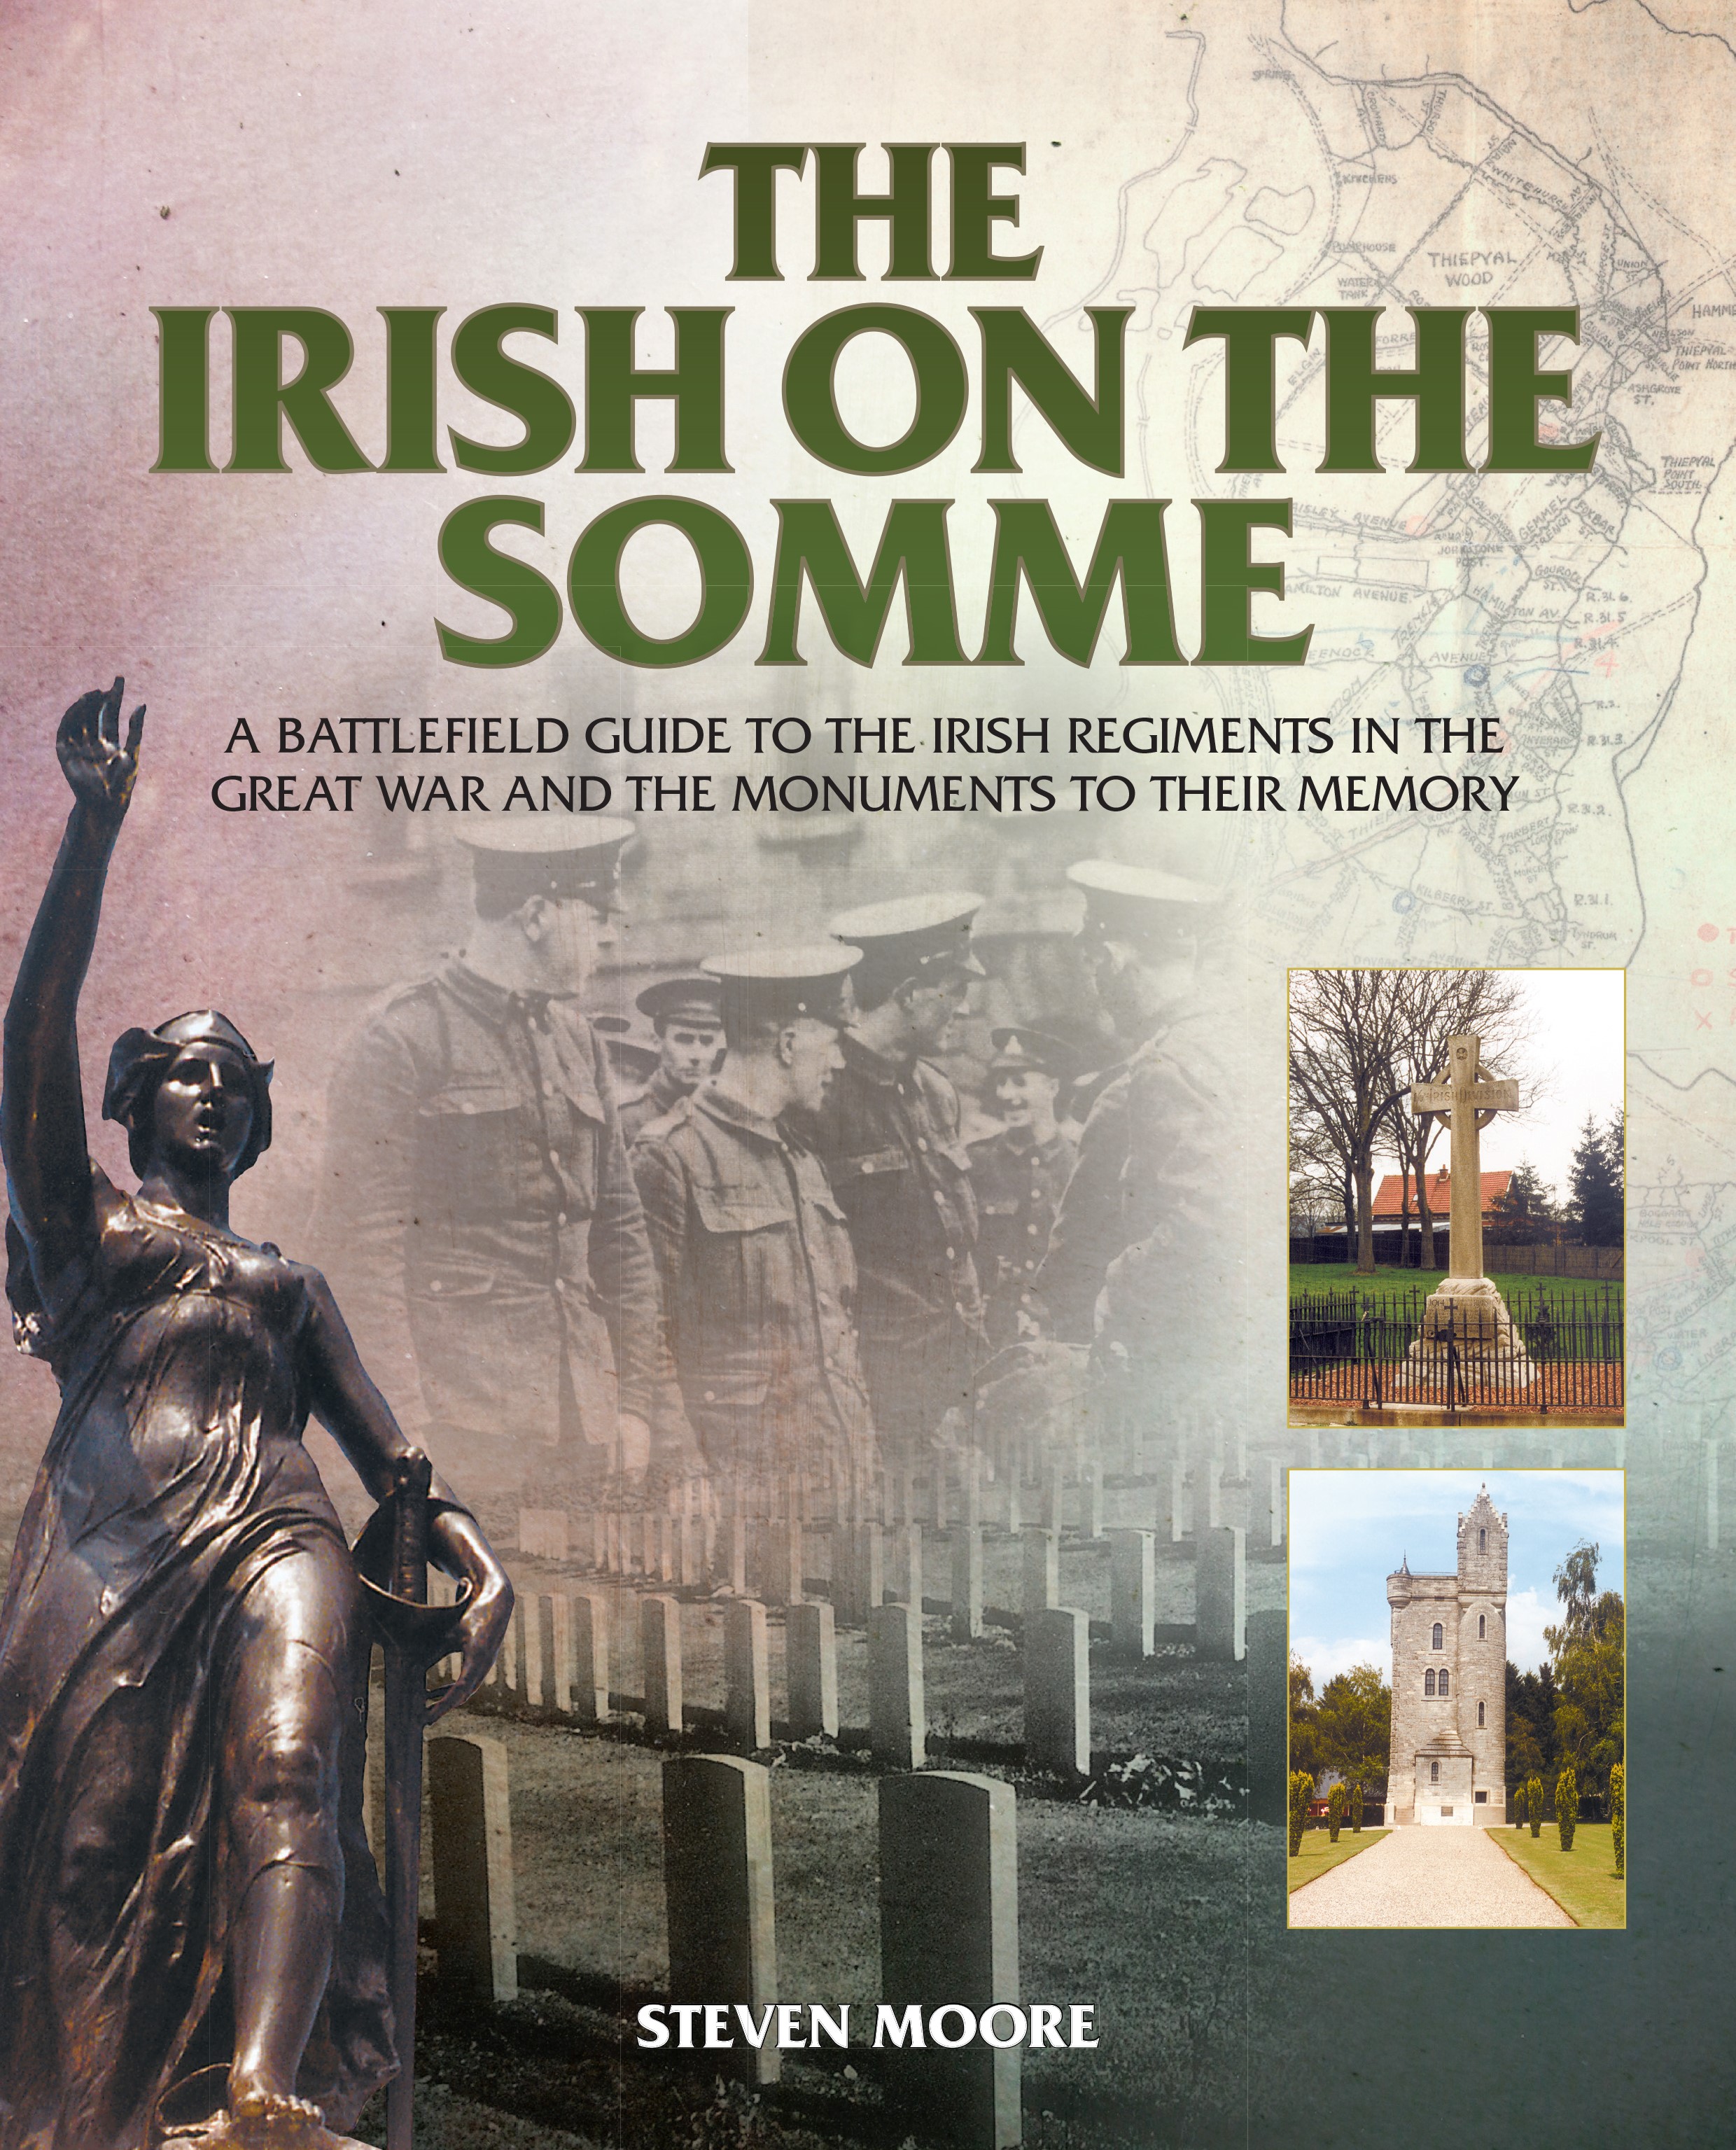 The Irish on the Somme - A battlefield guide to the Irish regiments in the Great War and the monuments to their memory